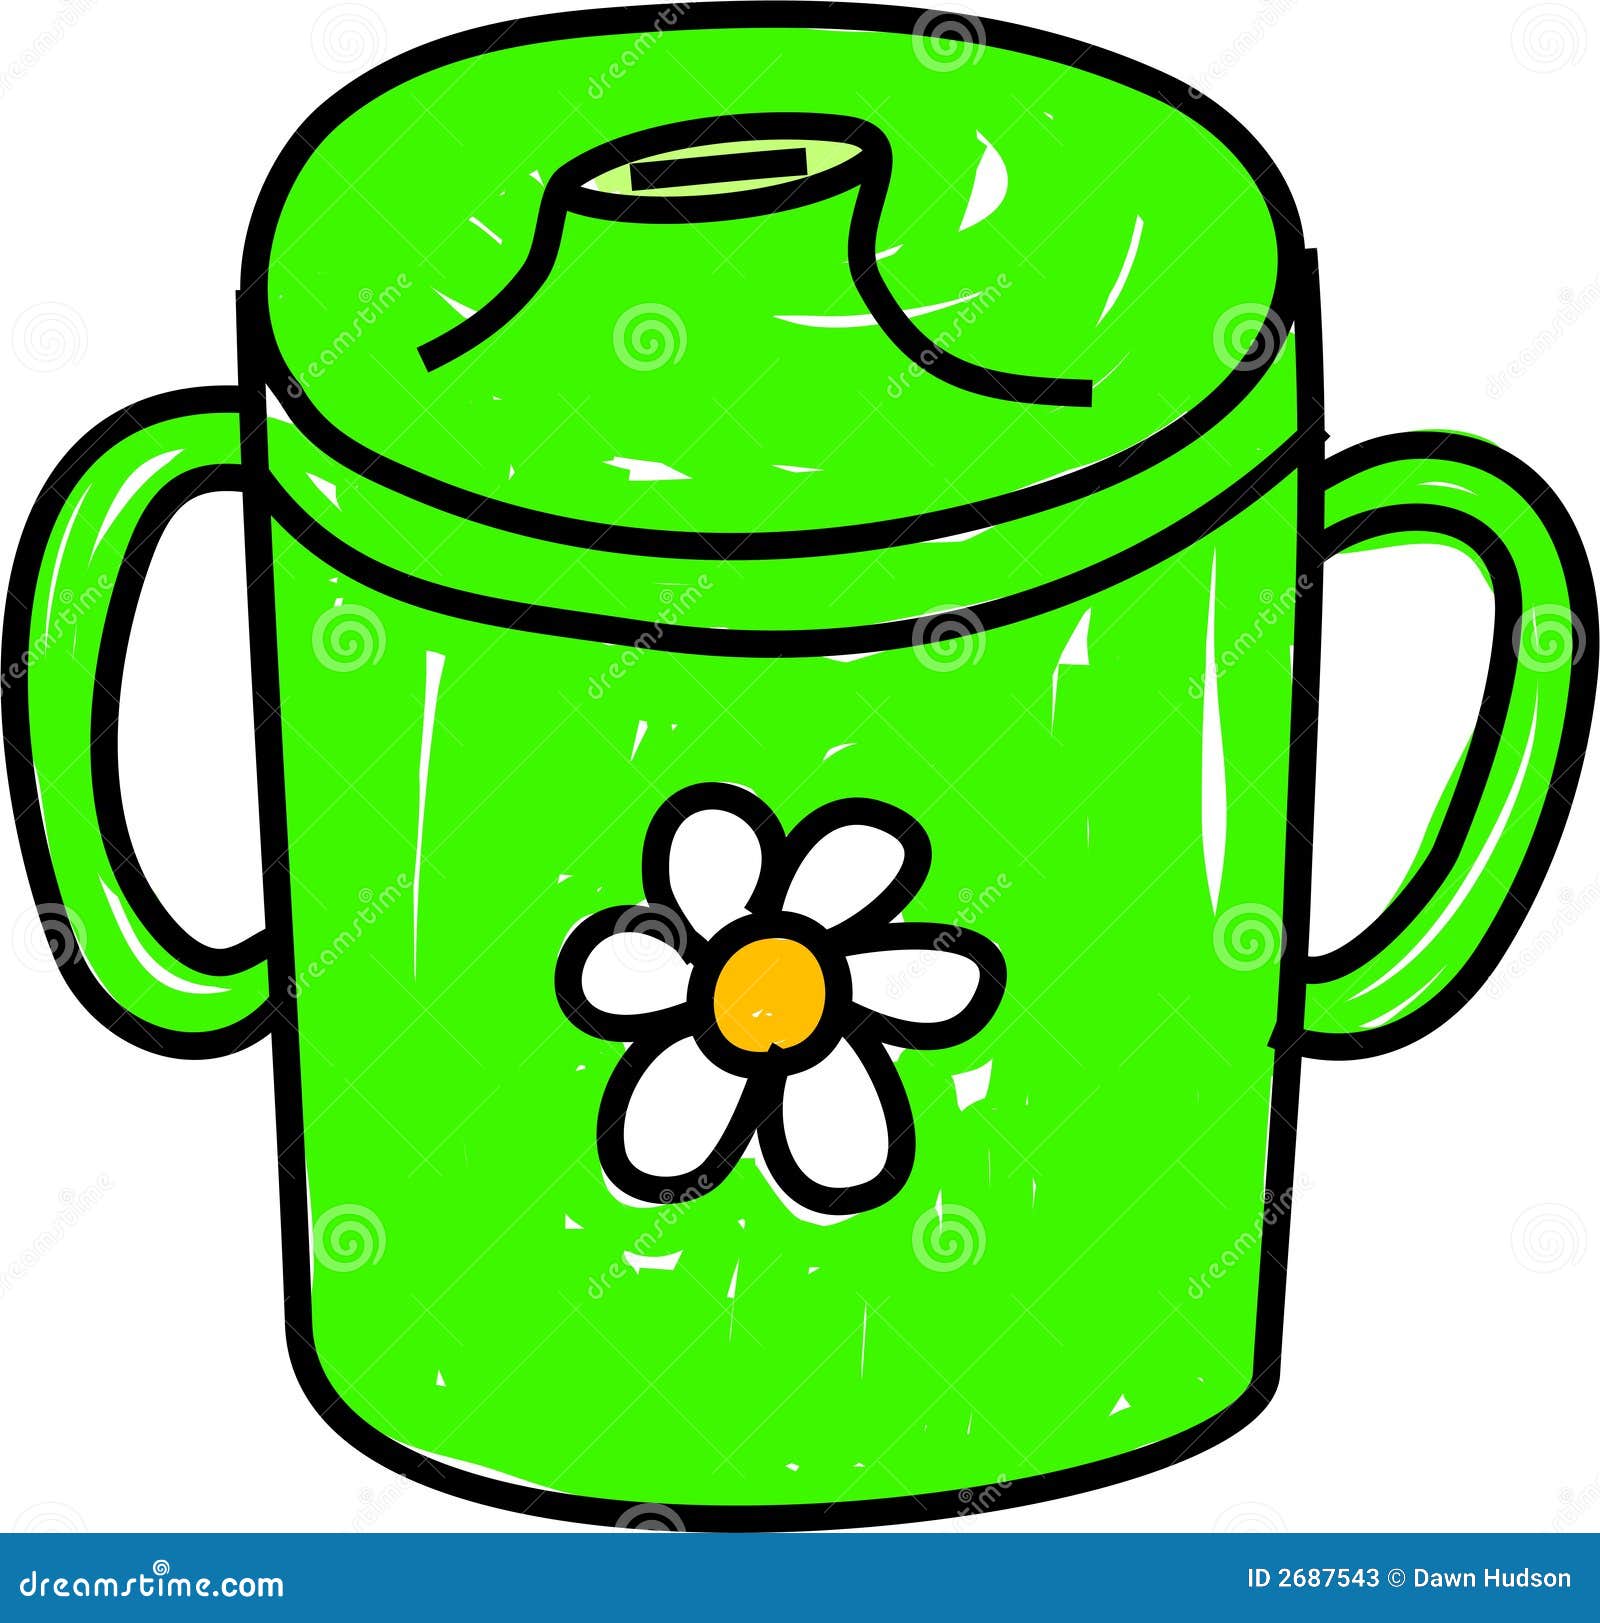 sippy cup clip art free - photo #14